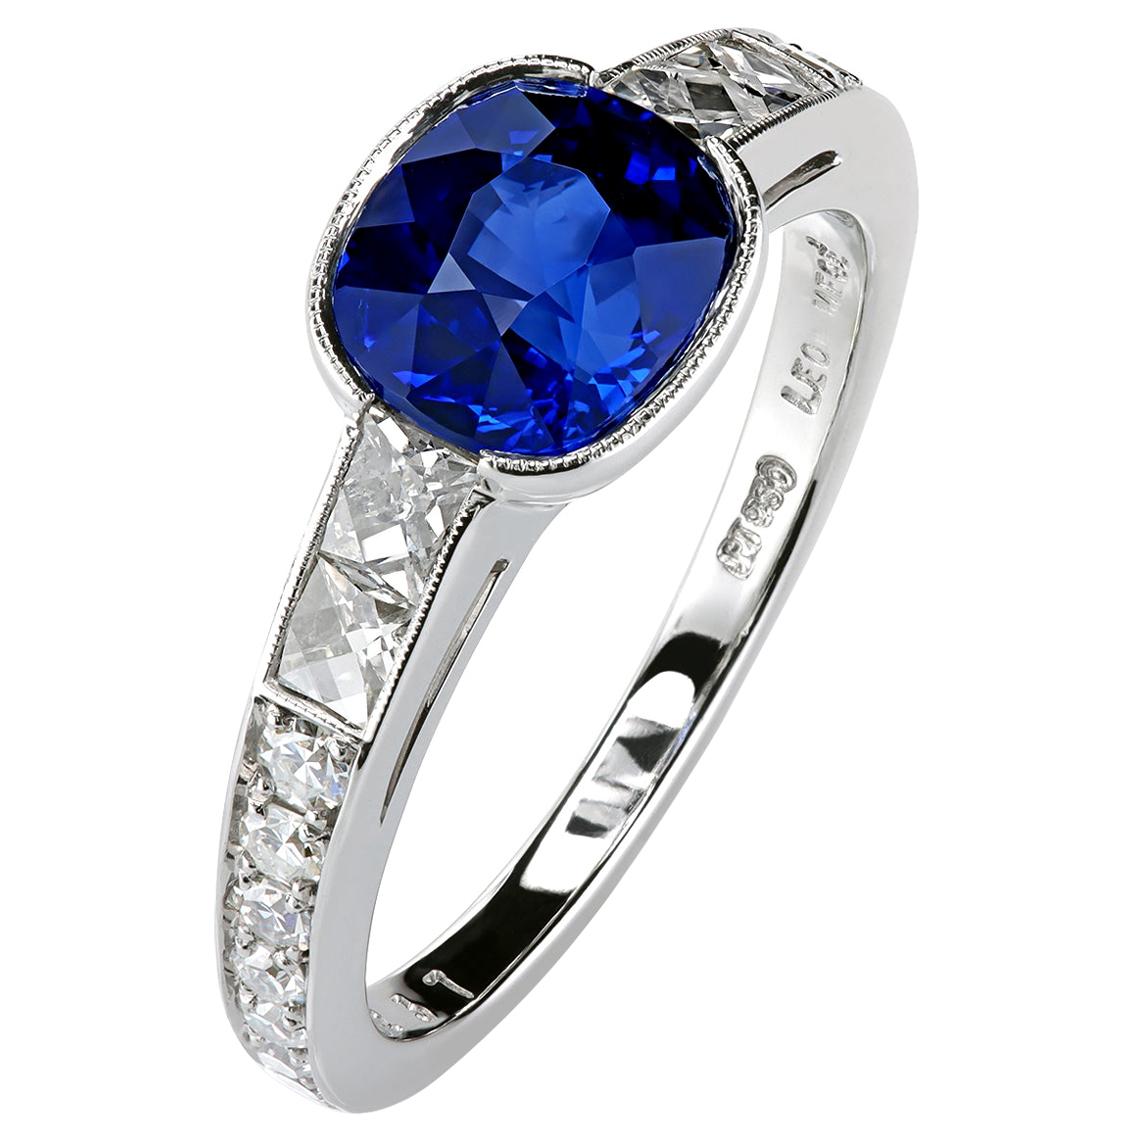 Five-Stone Platinum Ring with a Certified 1.69 Ct Blue Cushion Sapphire